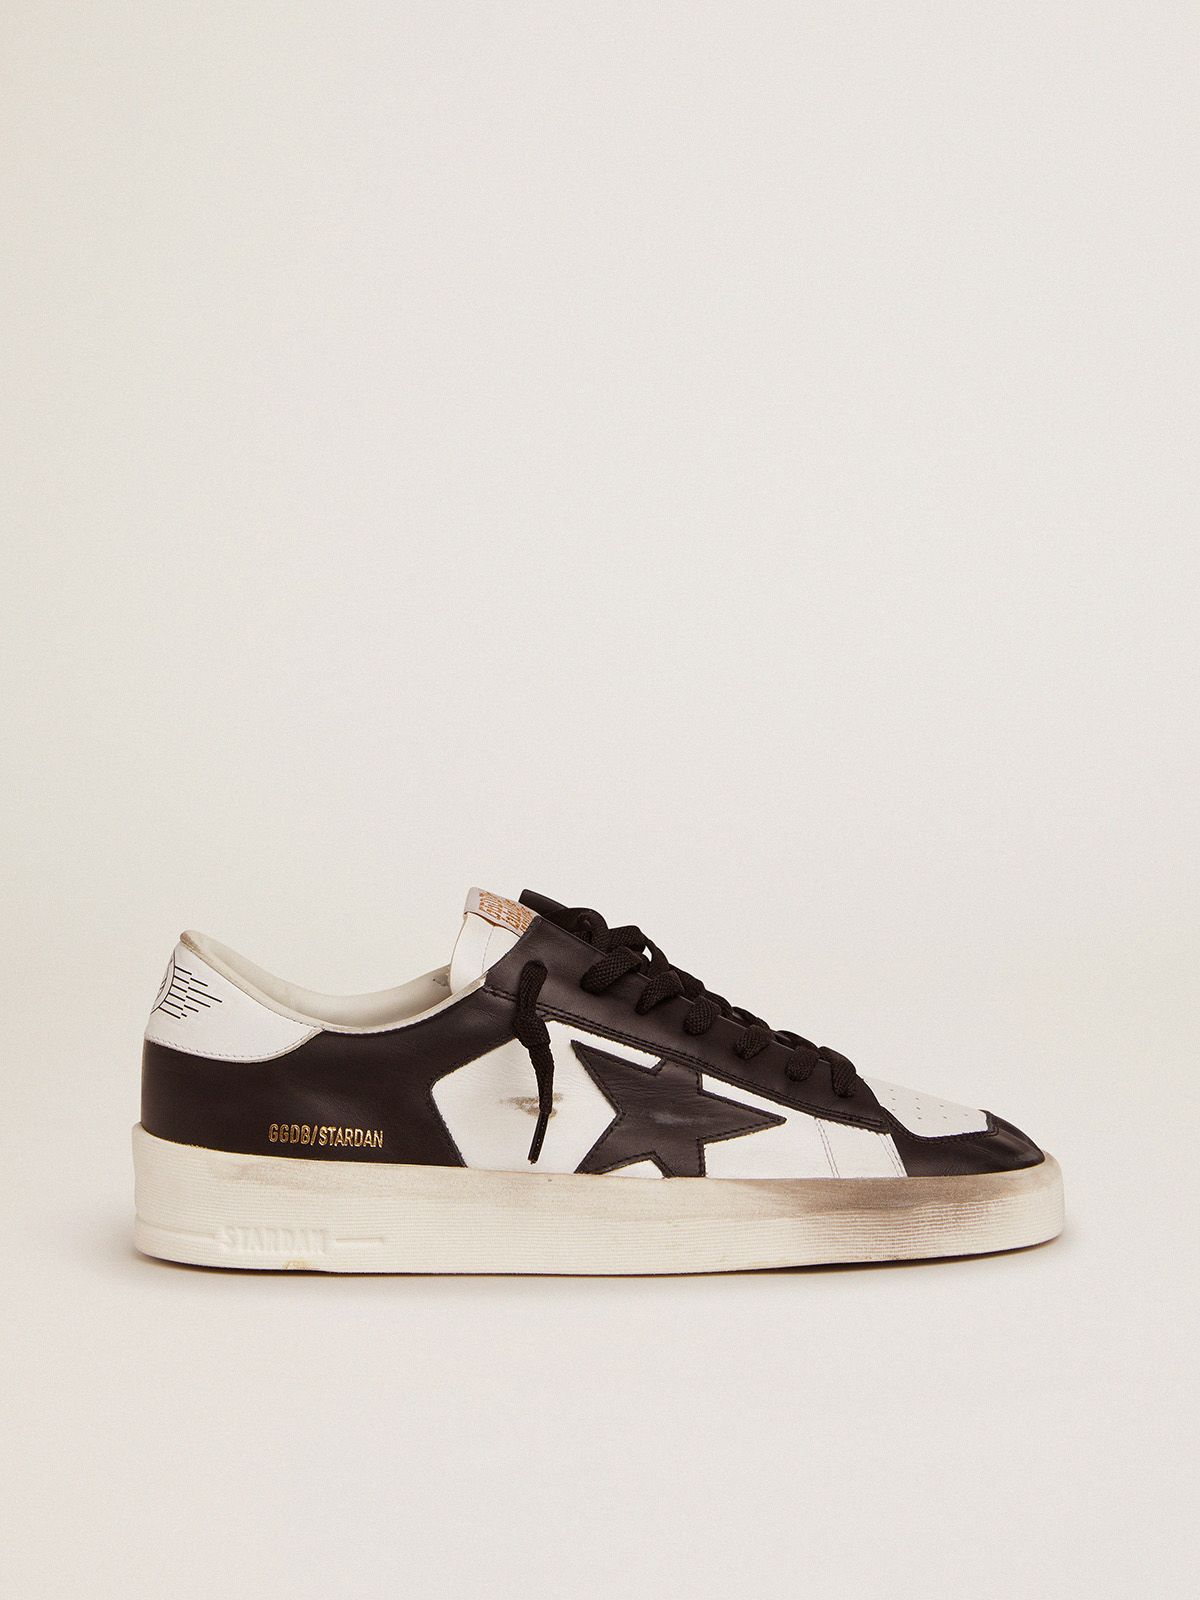 golden goose Stardan sneakers and white in black leather